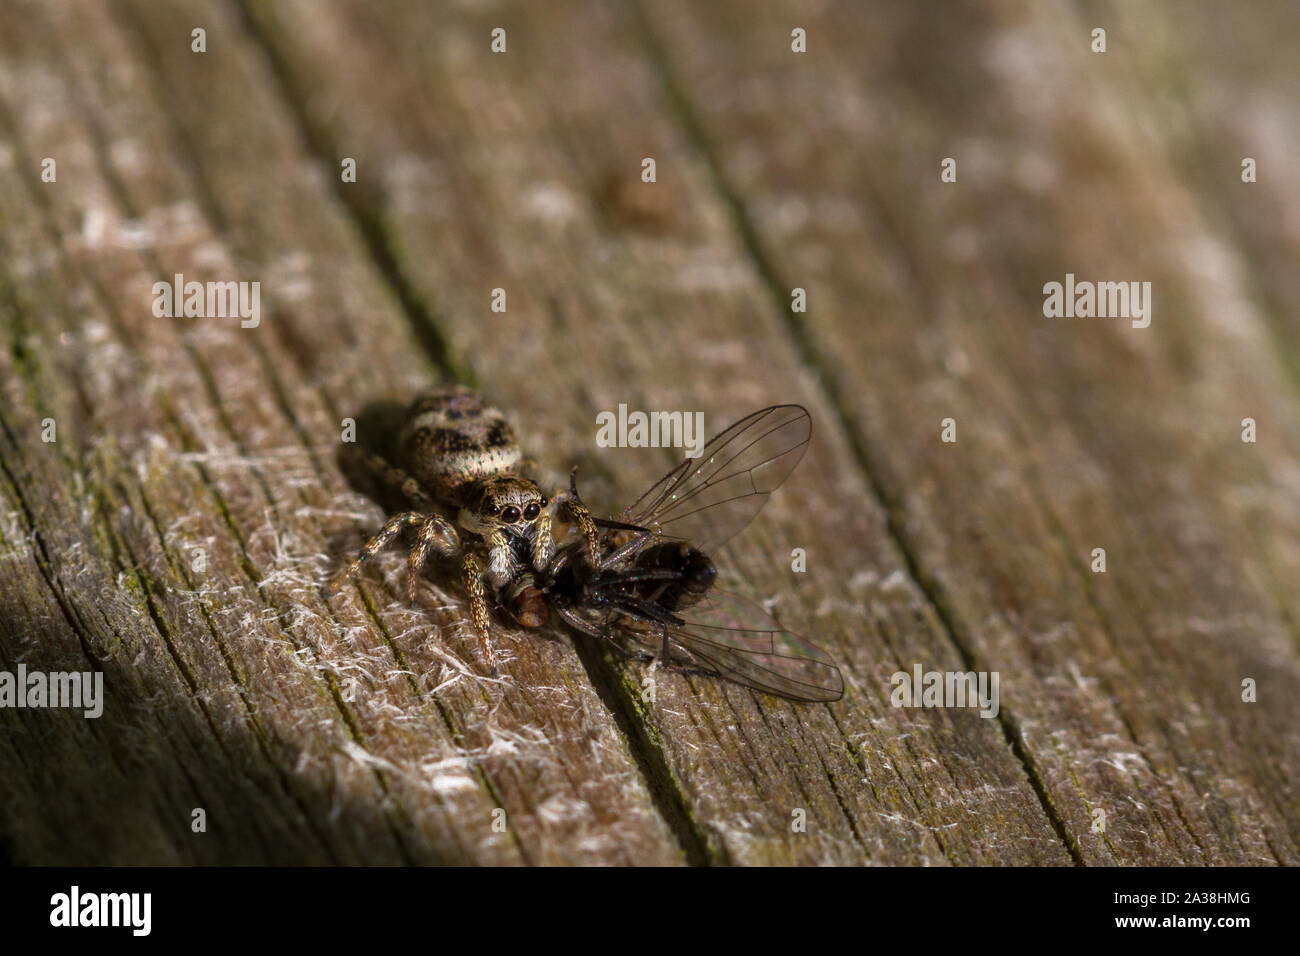 Zebra jumping spider (Salticus scenicus) eating its prey of a fly Stock Photo